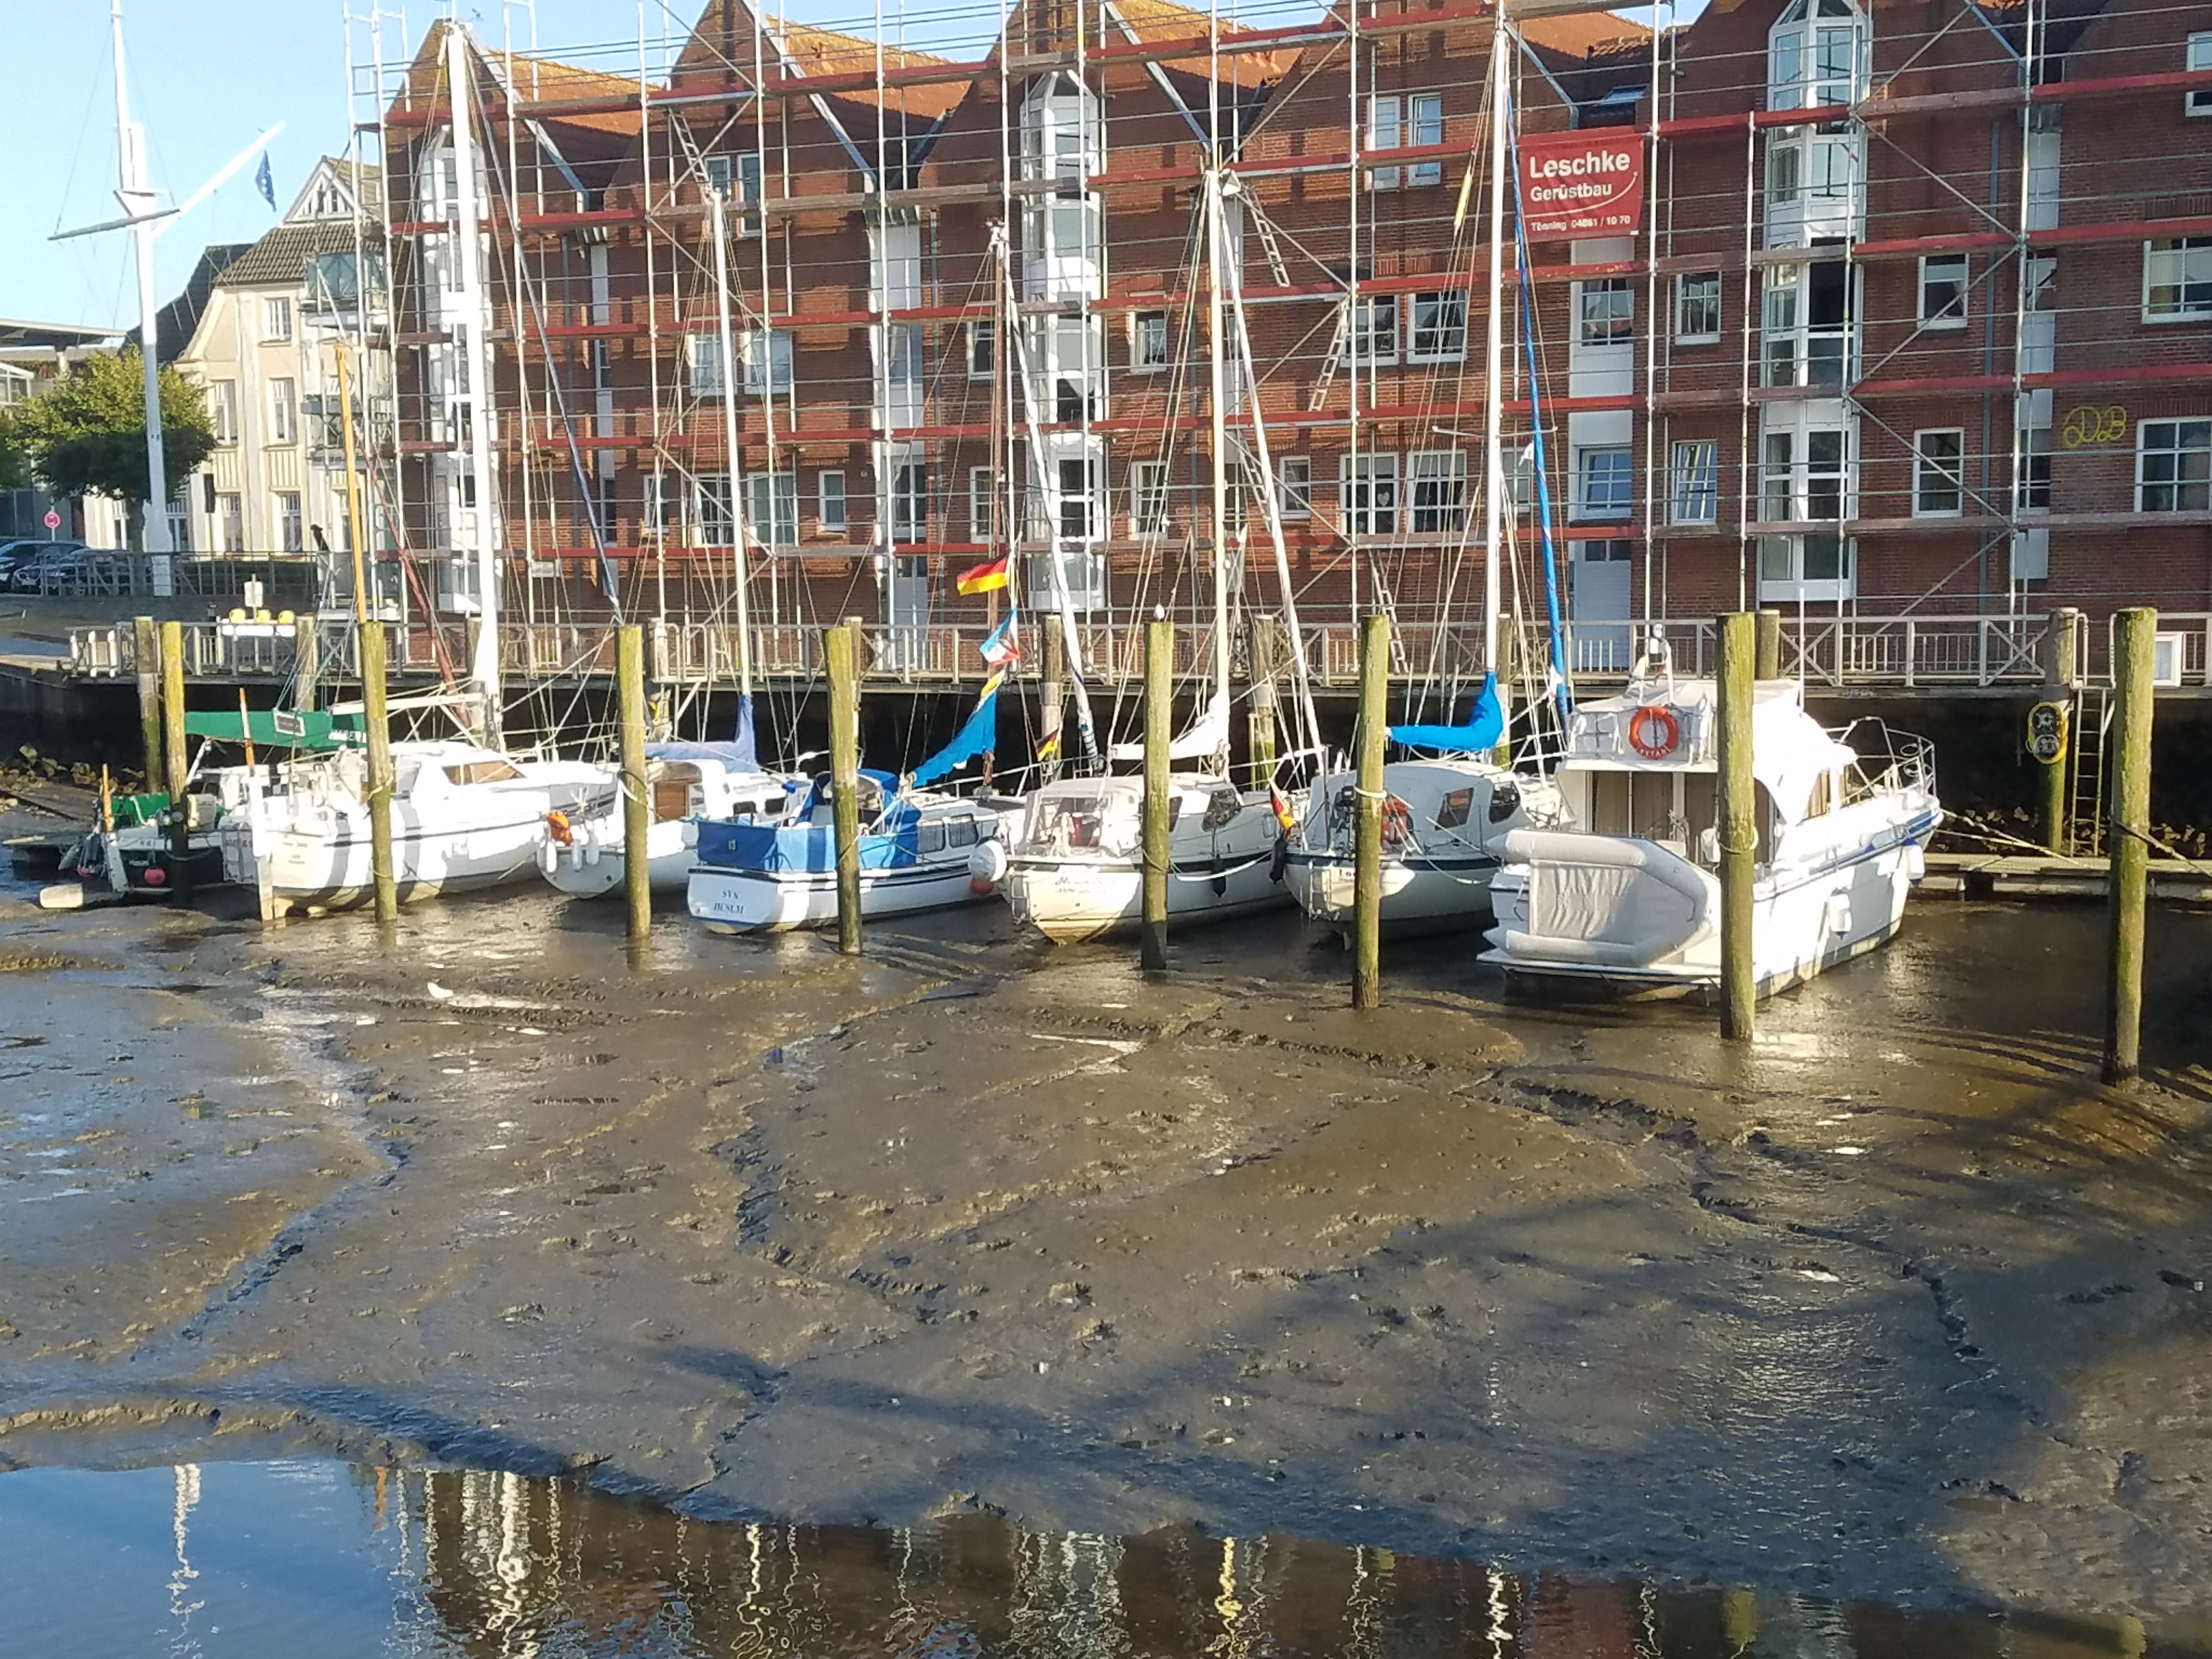 Husum Harbor at low tide with boats in mud